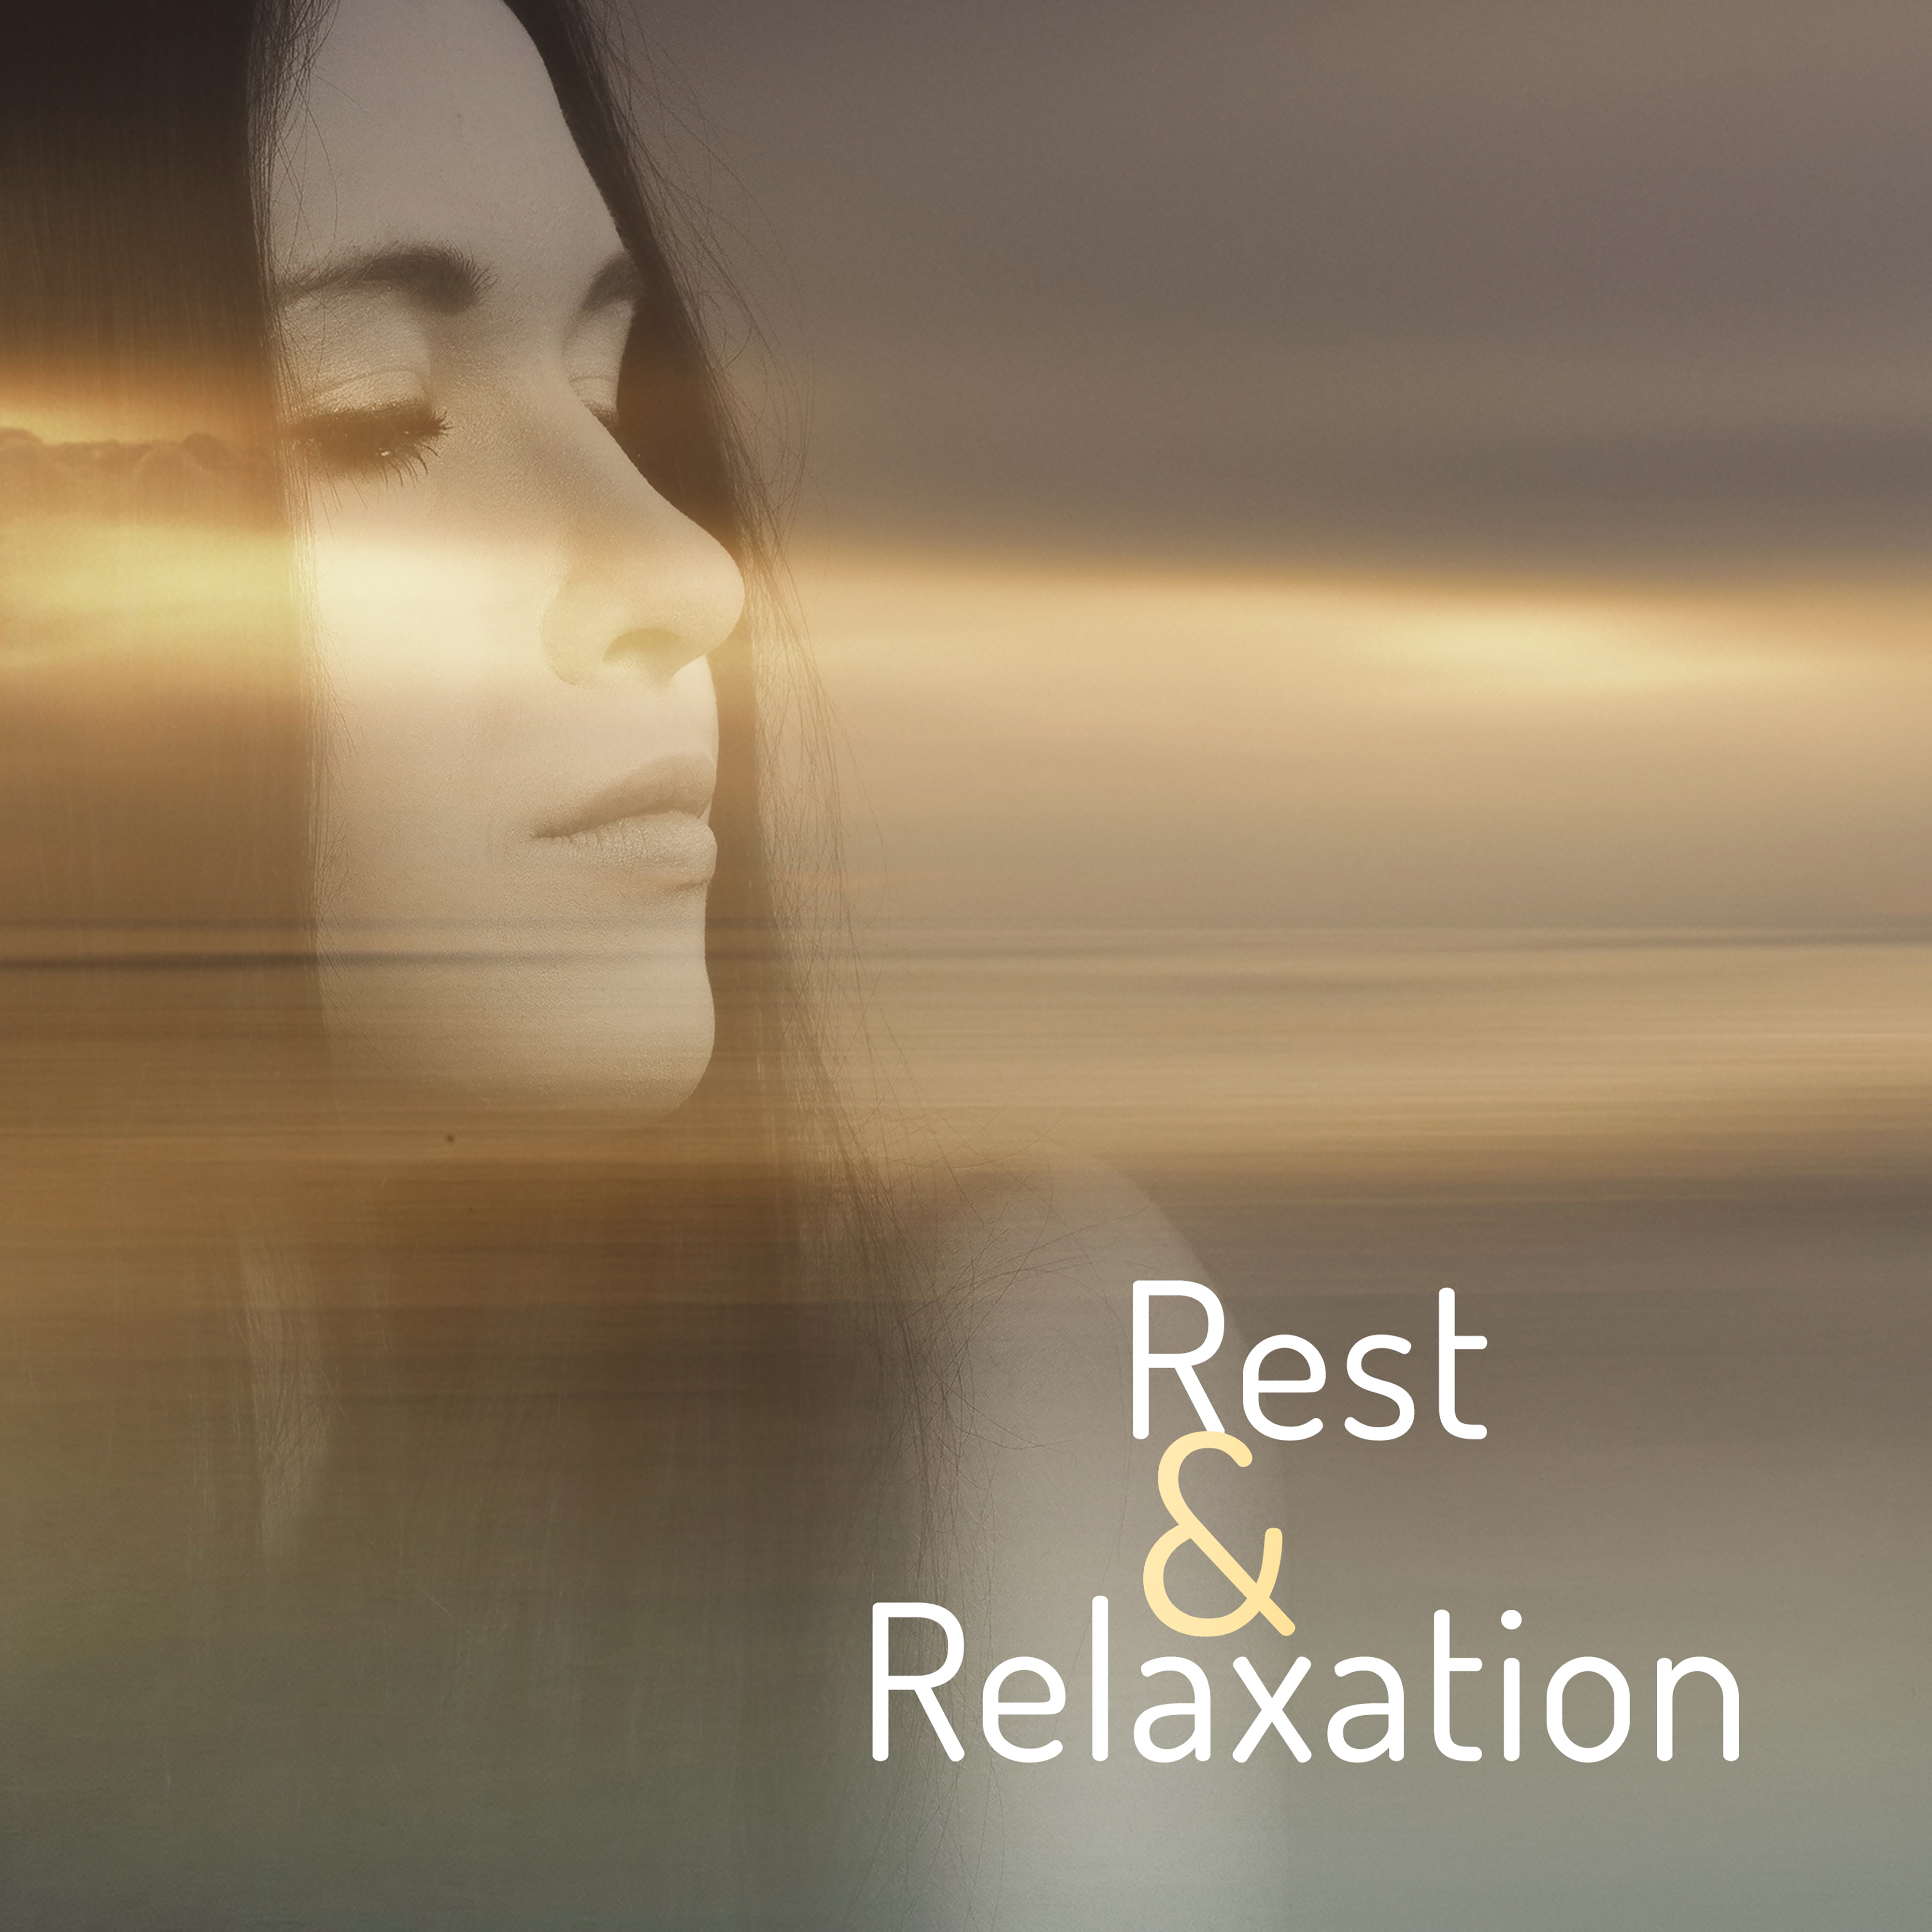 Rest  Relaxation  New Age, Relaxing Music, Deep Relaxation, Spa, Massage, Reiki